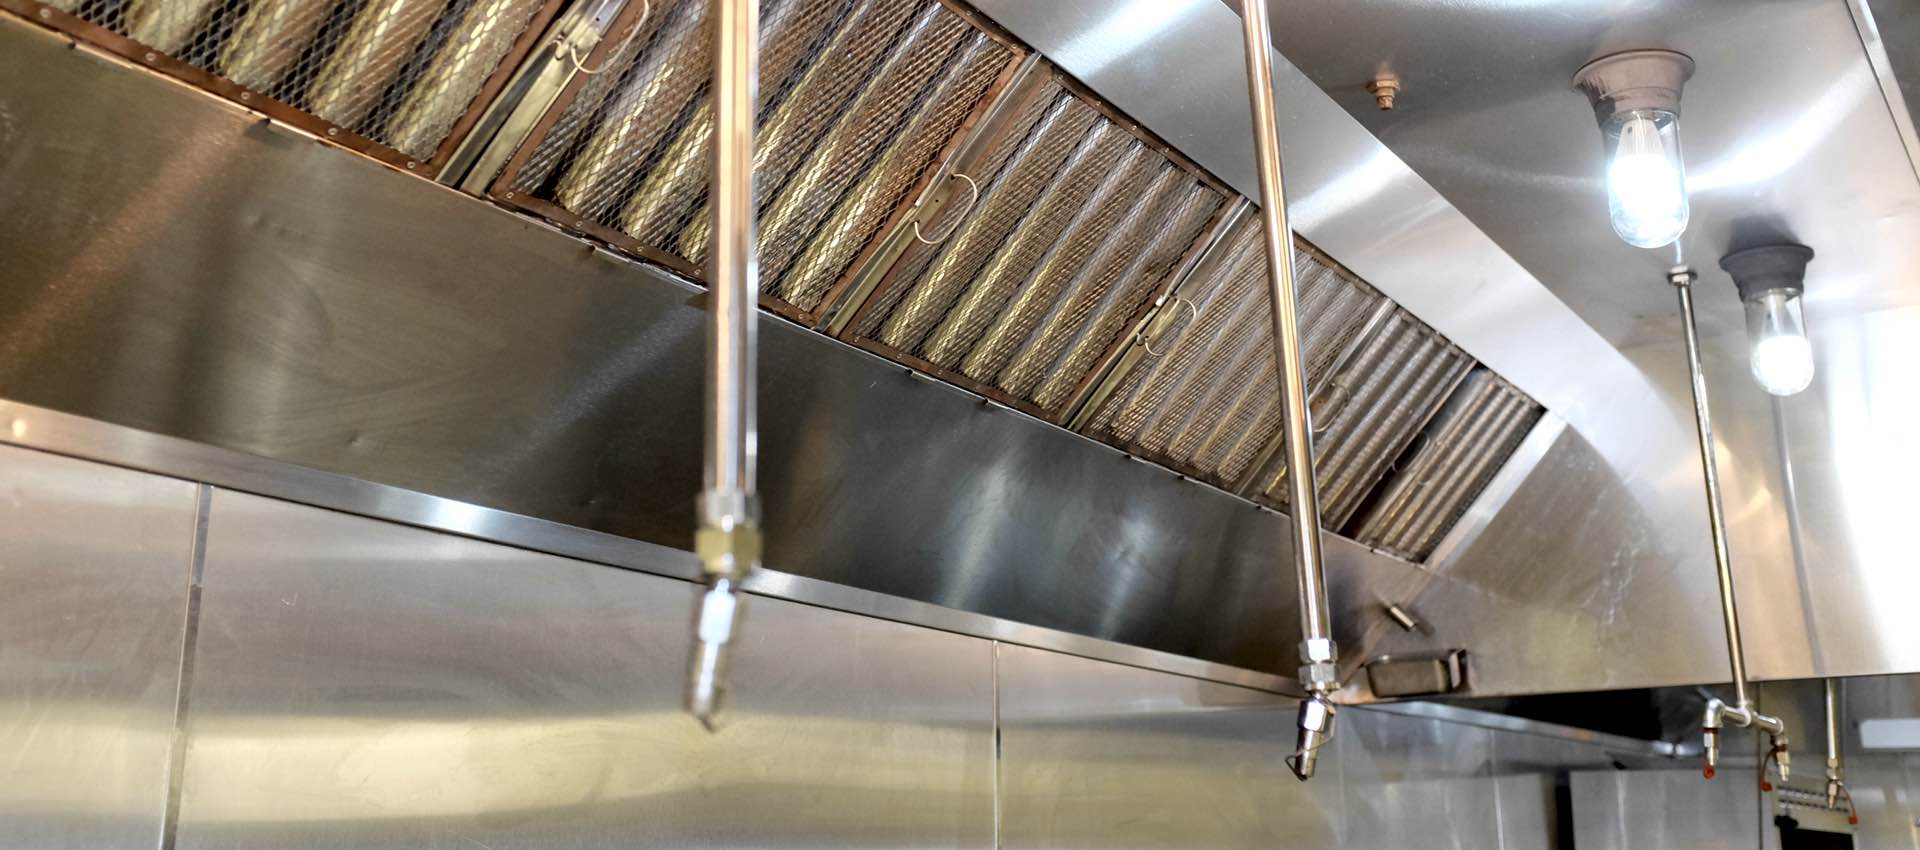 Maintenance & Cleaning Schedule of Commercial Kitchen Extractor Components